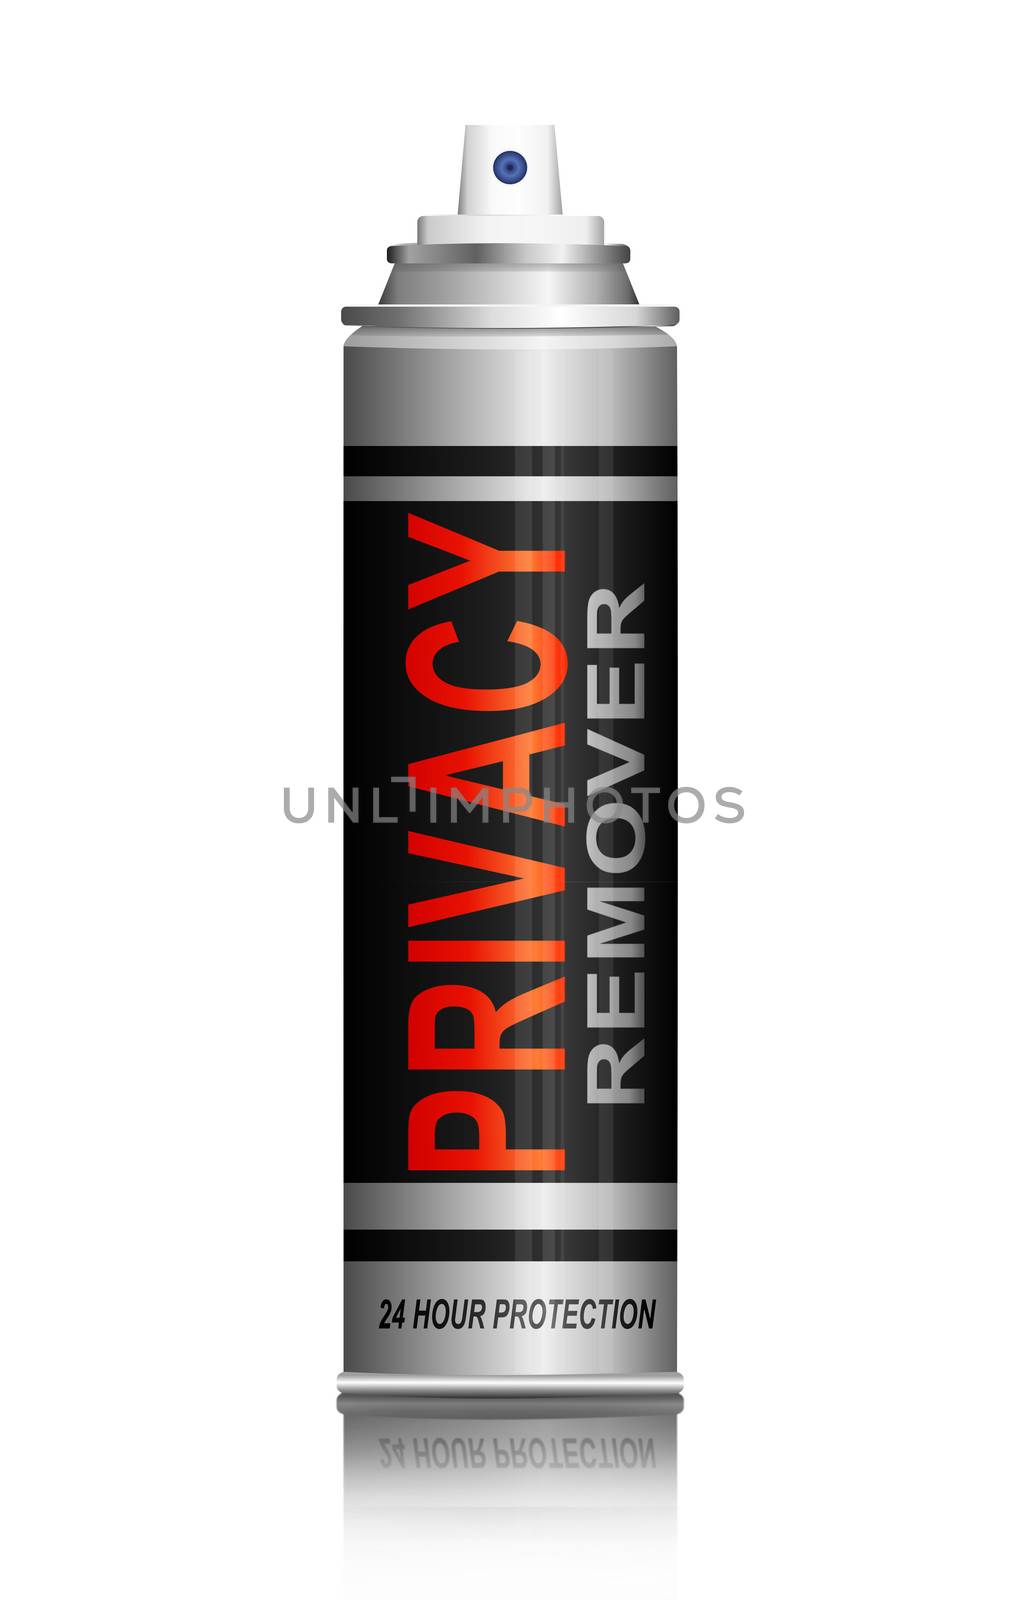 Illustration depicting a spray can with a privacy remover concept.